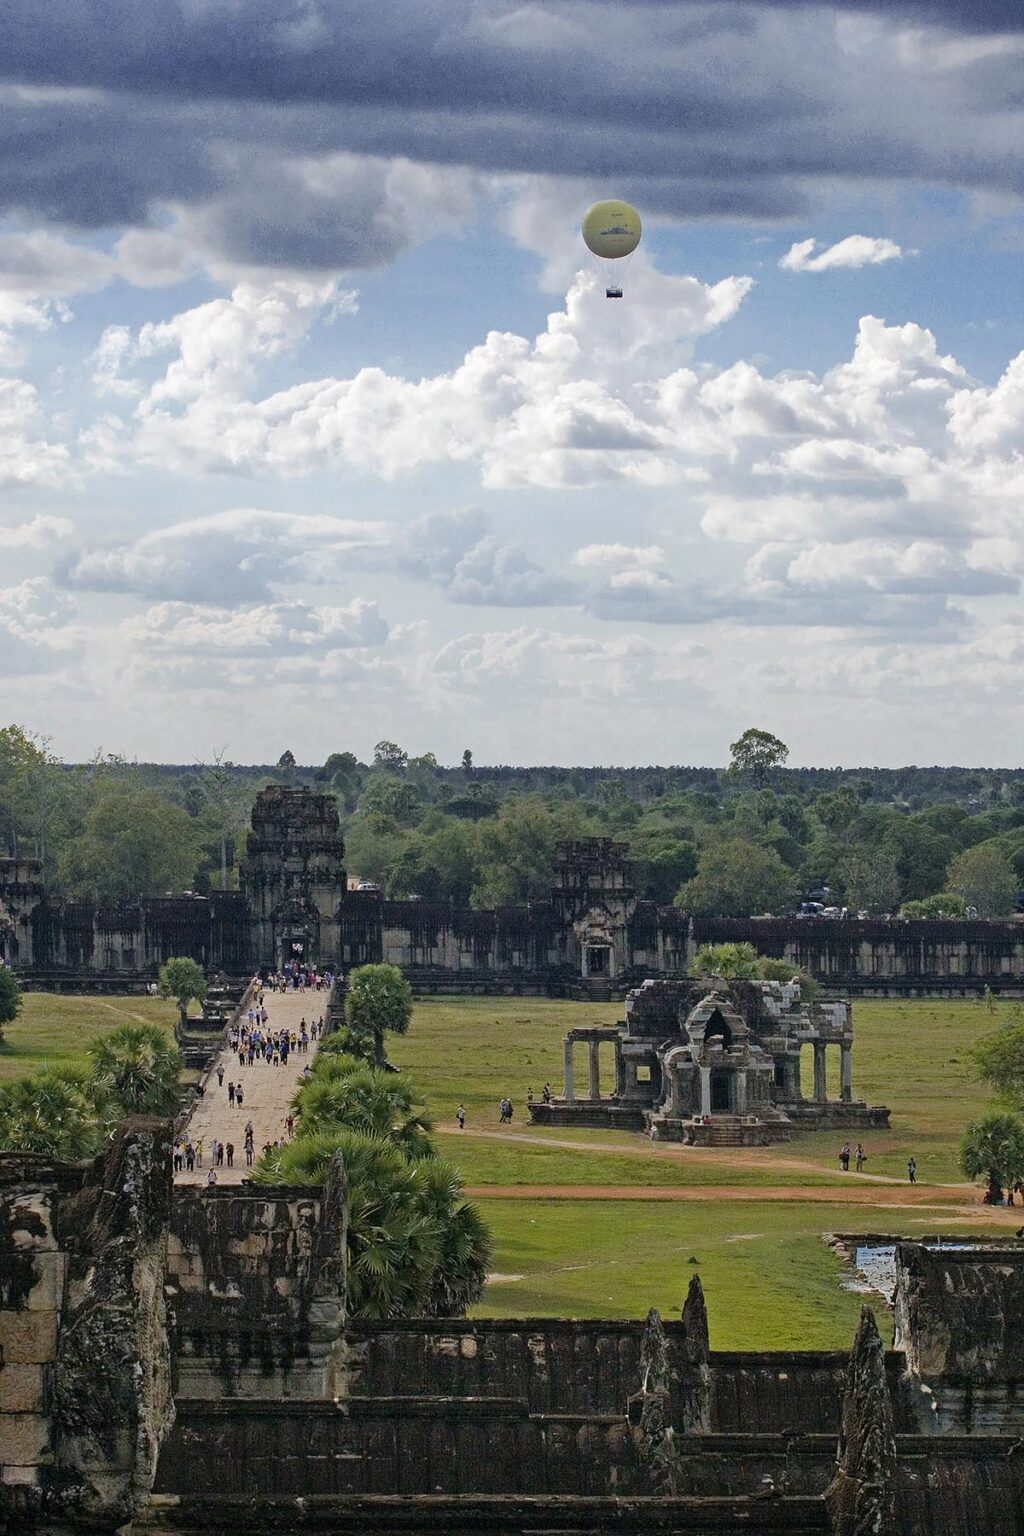 Hot air balloon above the West Gopura gate at Angkor Wat, built in the 11th century by Suryavarman the 2nd - Cambodia